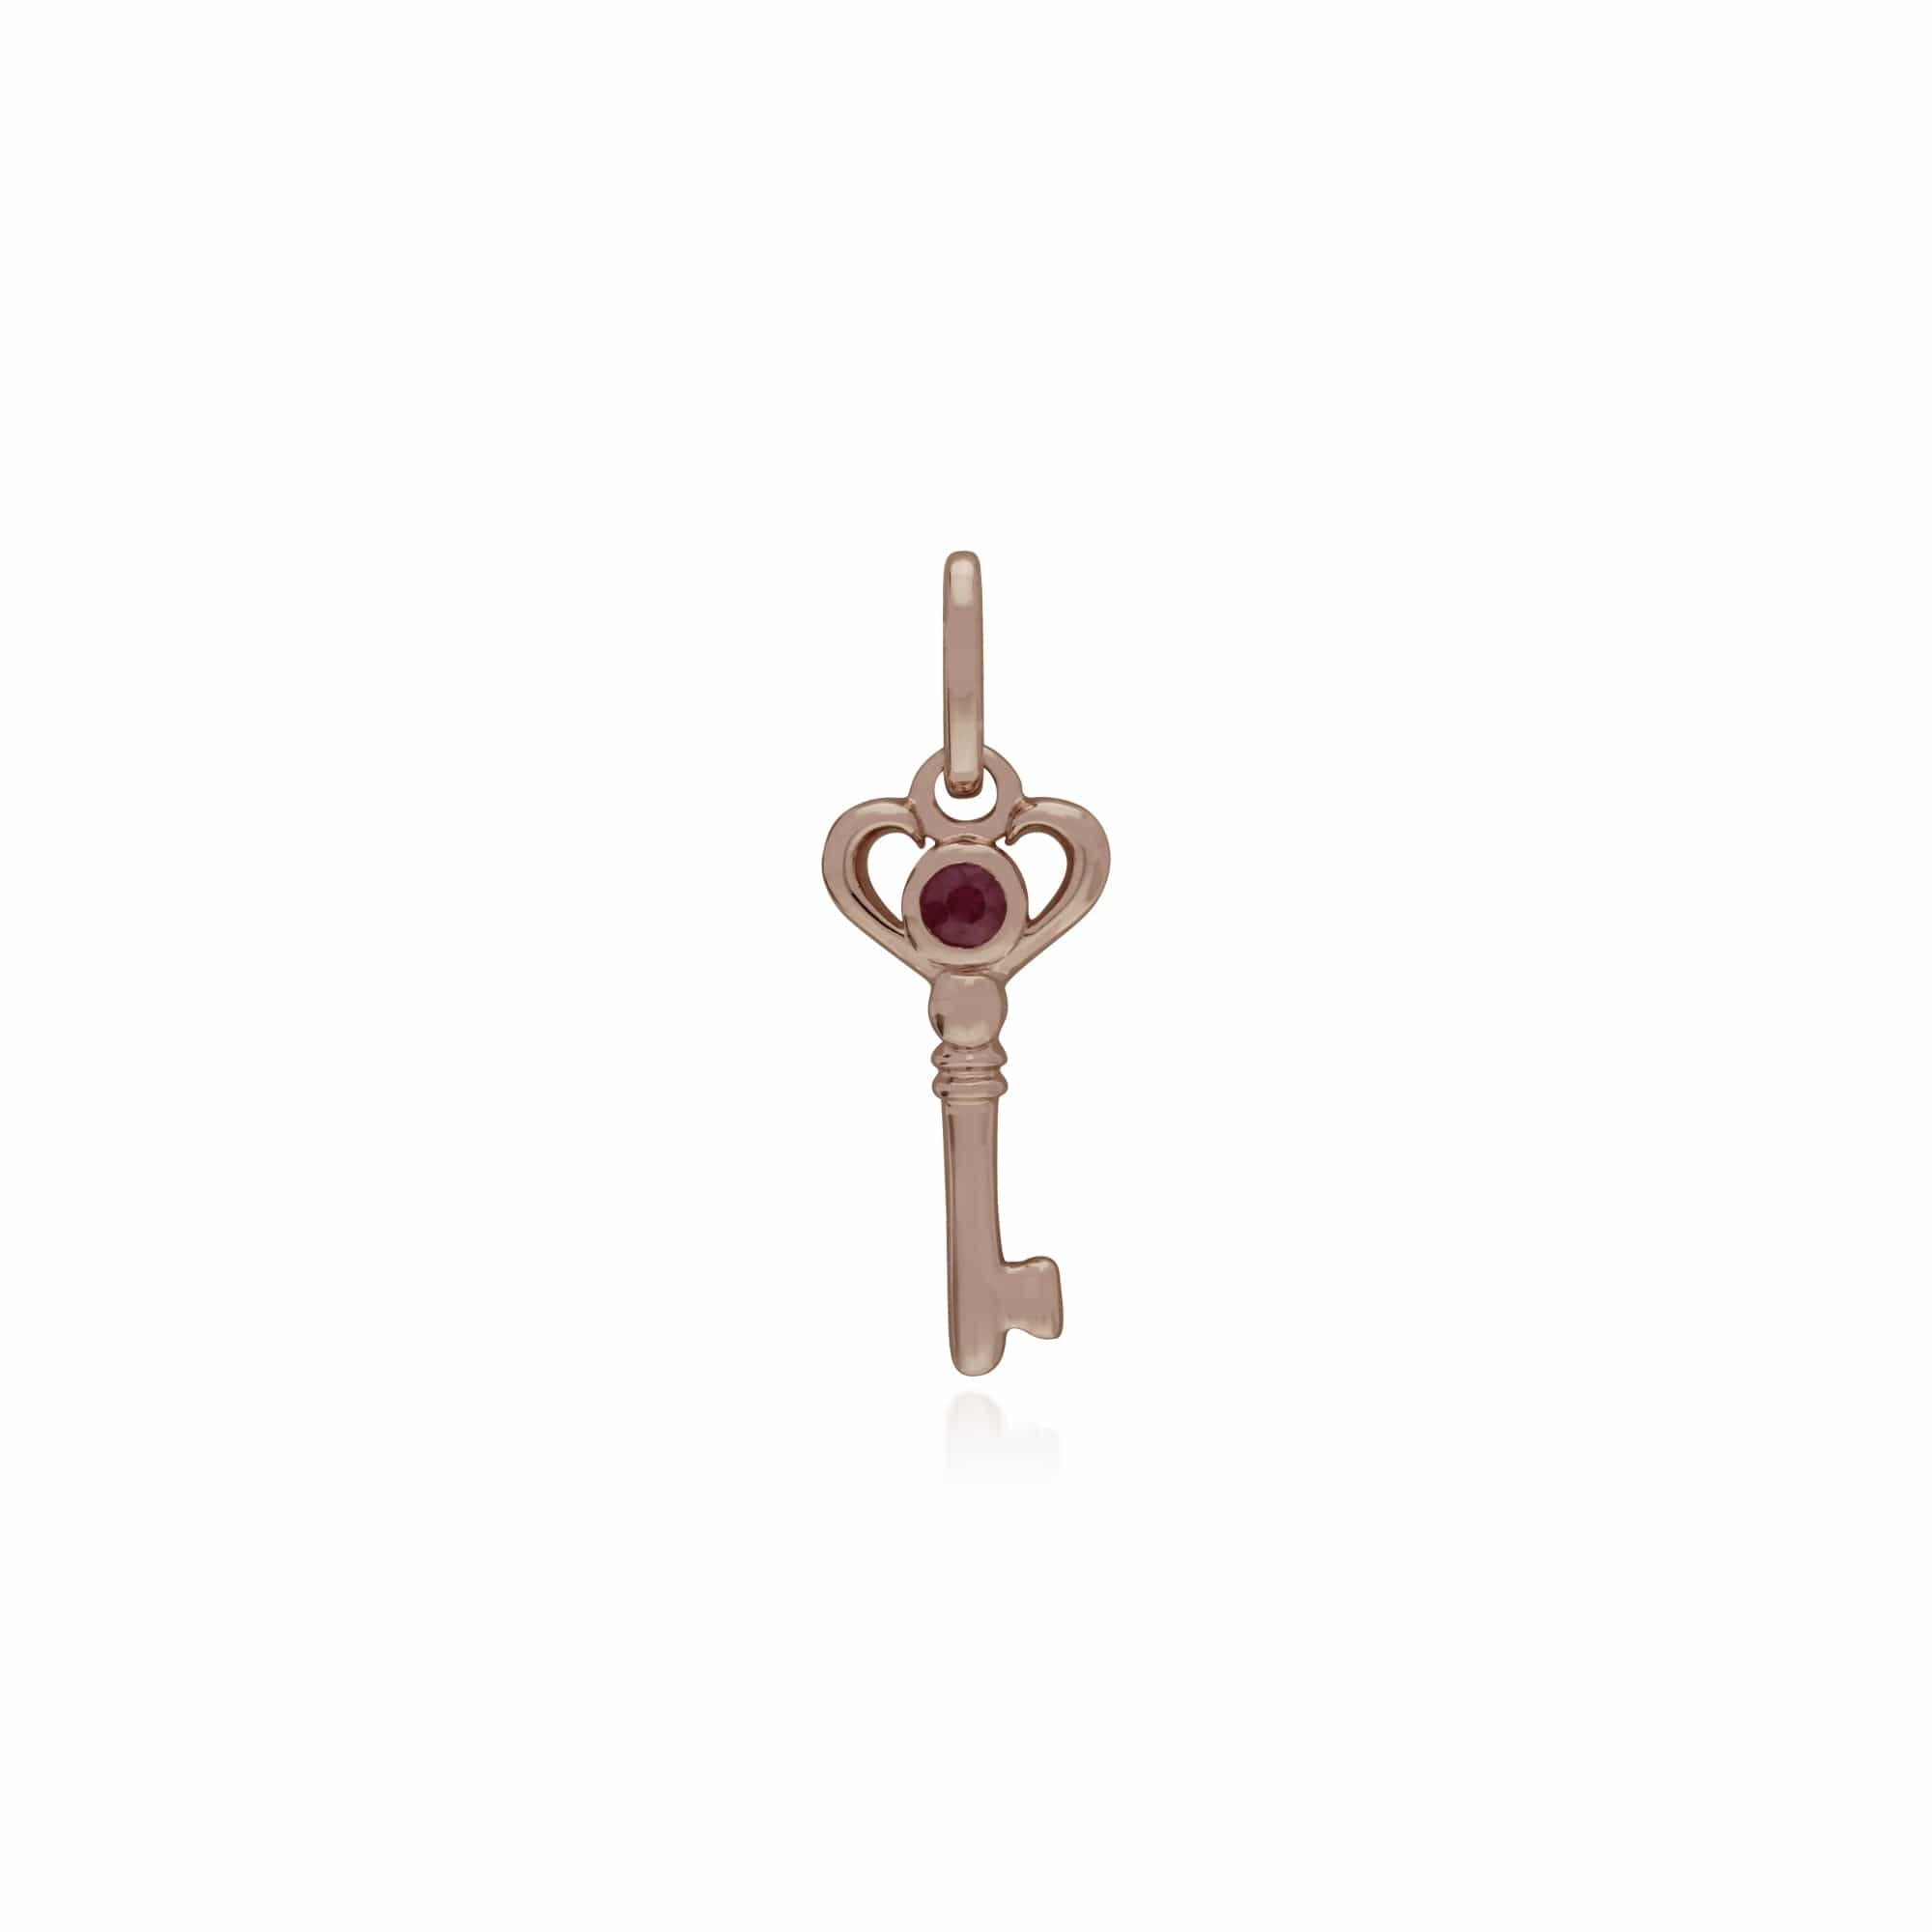 270P026301925-270P026501925 Classic Swirl Heart Lock Pendant & Ruby Key Charm in Rose Gold Plated 925 Sterling Silver 2